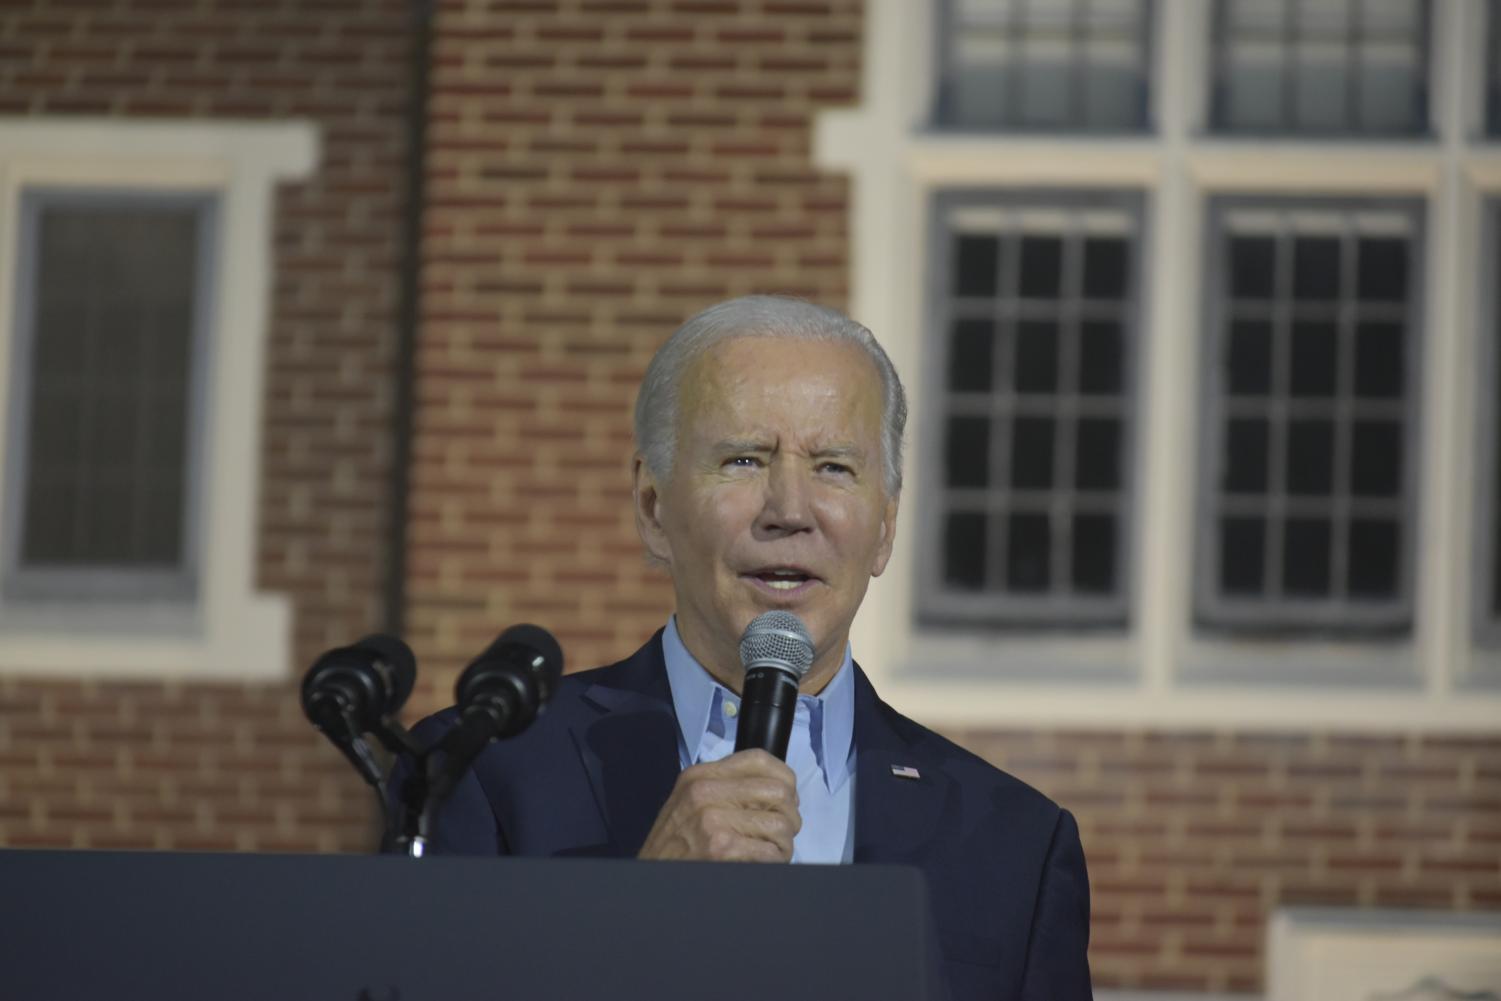 Maroons+Photos+from+President+Bidens+Visit+to+Westchester